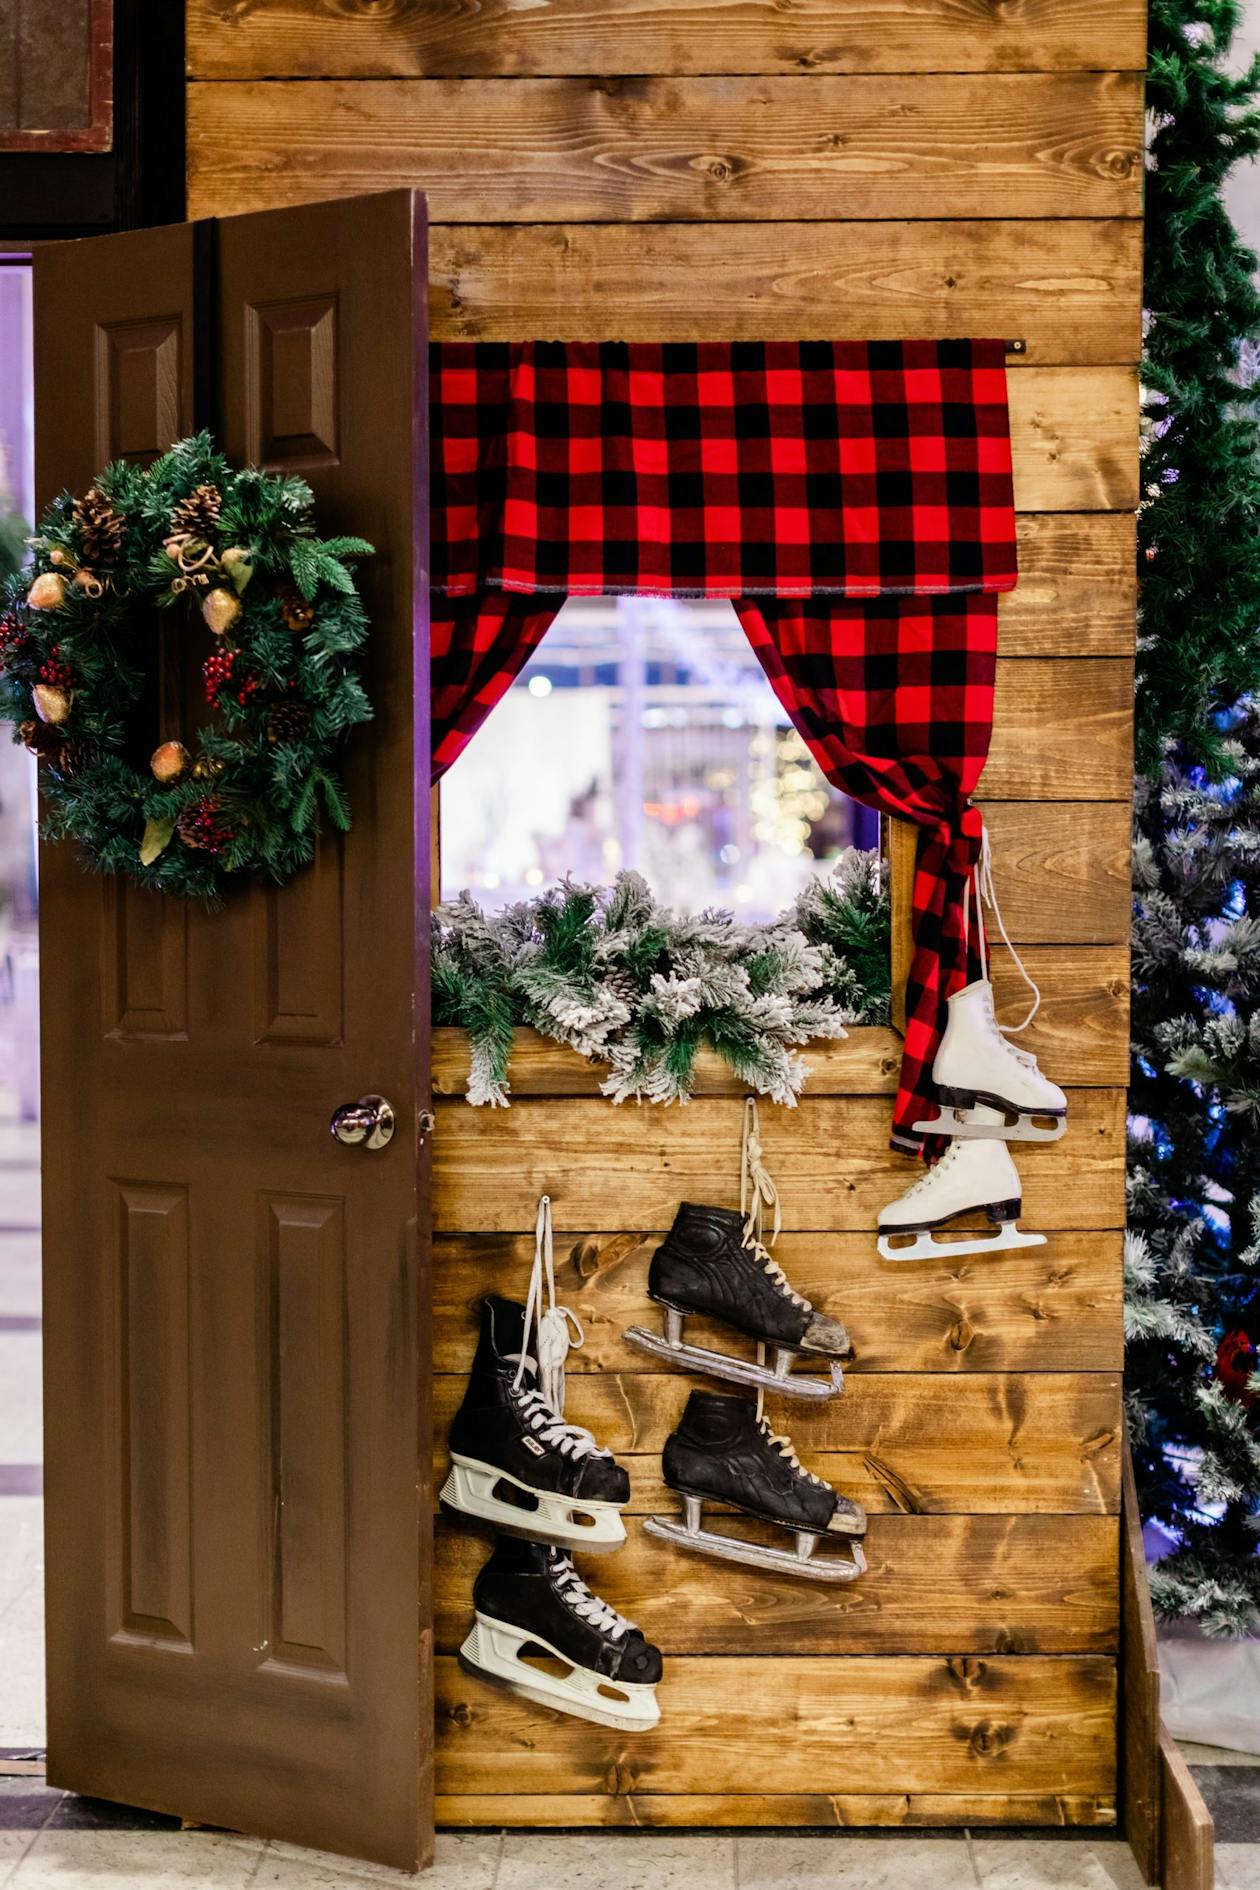 A wall with ice skates hung up on it and a cabin home design | PartySlate